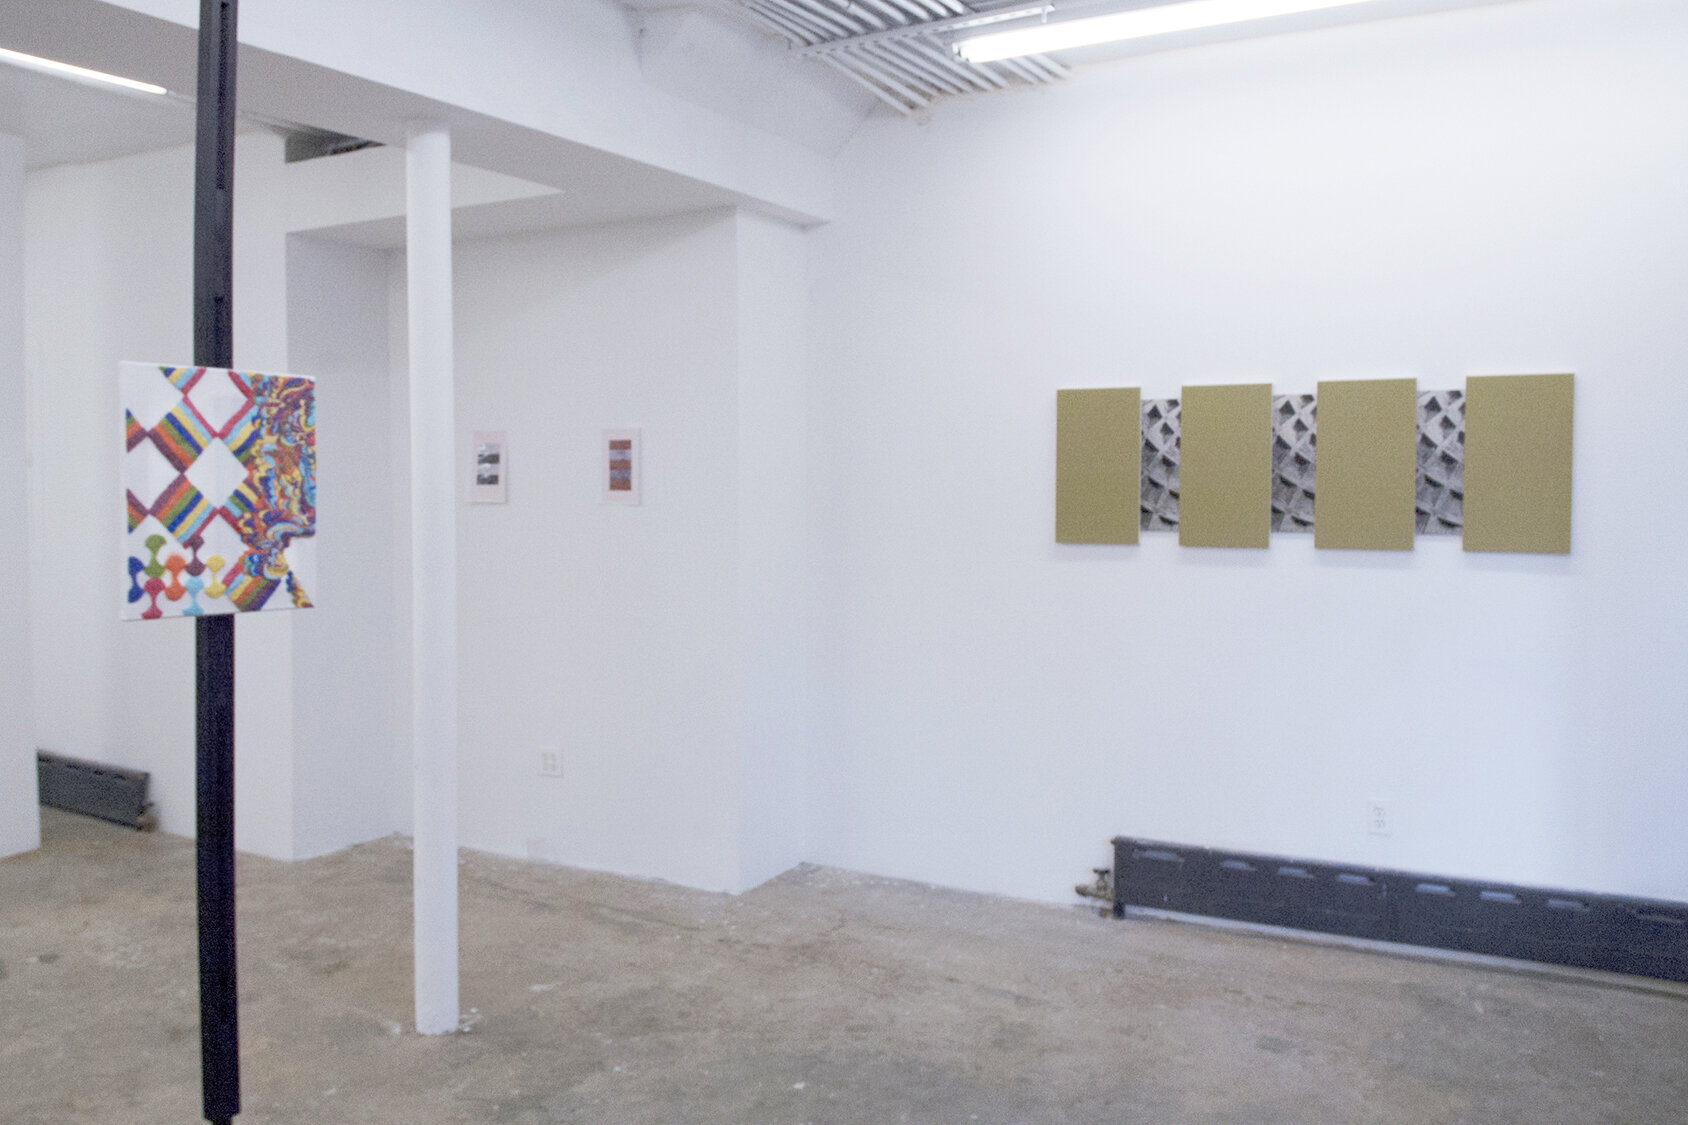 Installation image from the 2013 exhibition, Sabine Boehl, F.P. Boué, Sebastian Freytag, at Cindy Rucker Gallery